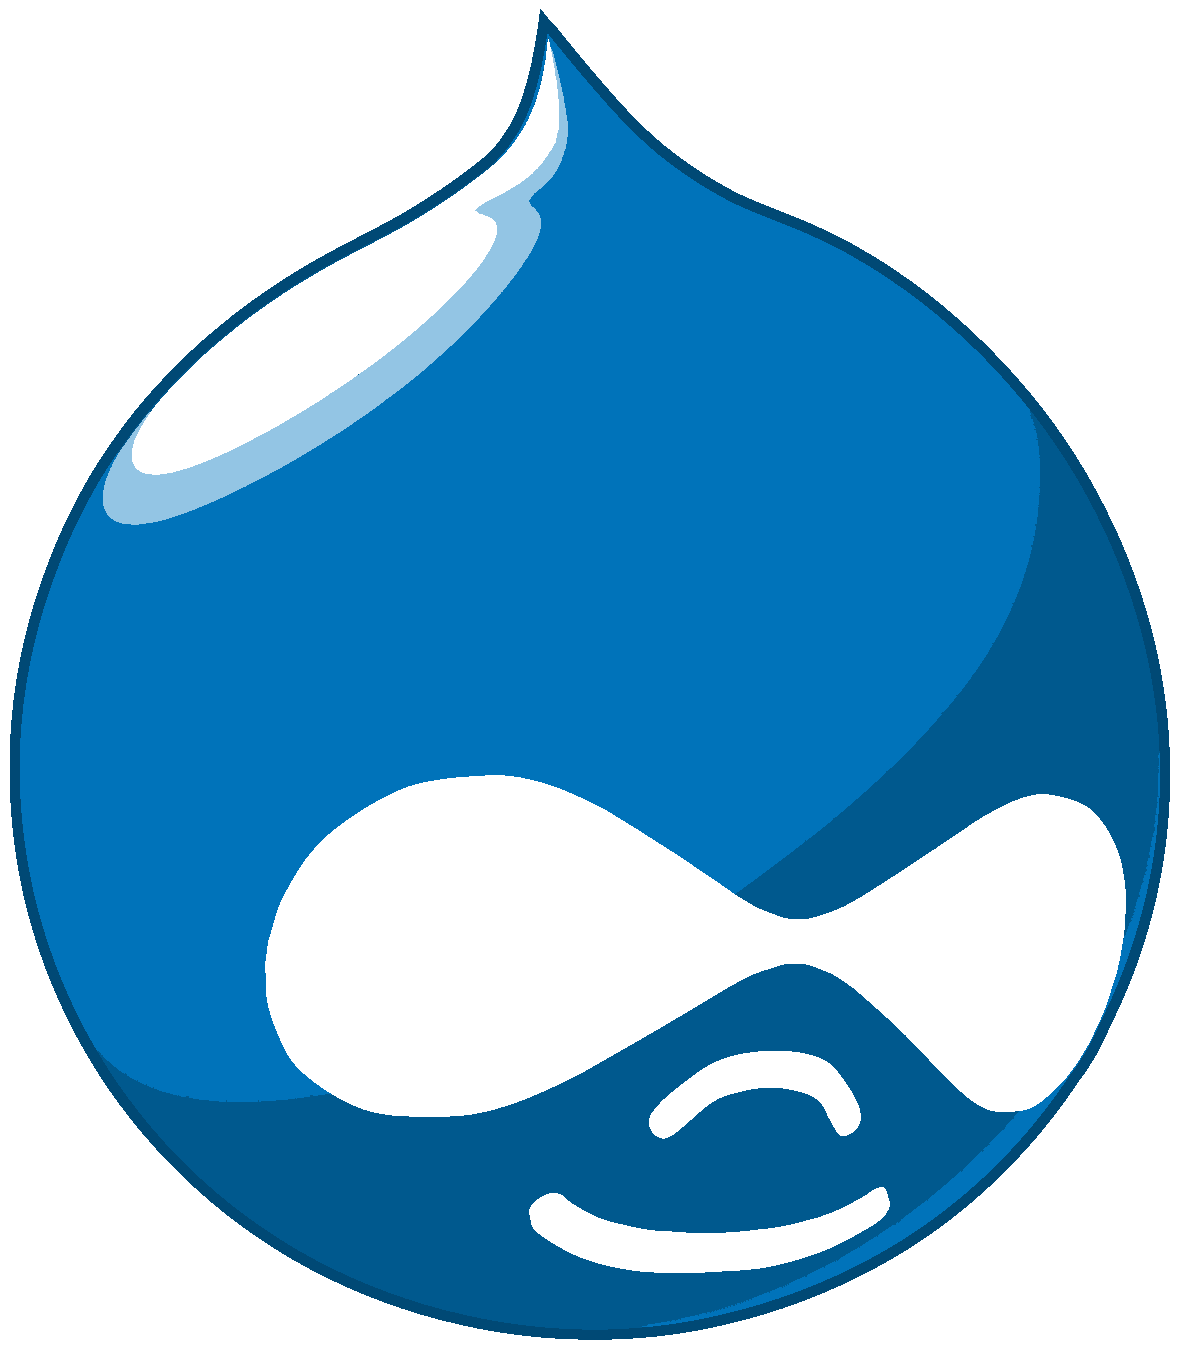 Blue Water Drop Logo - File:Druplicon.large.png - Wikimedia Commons